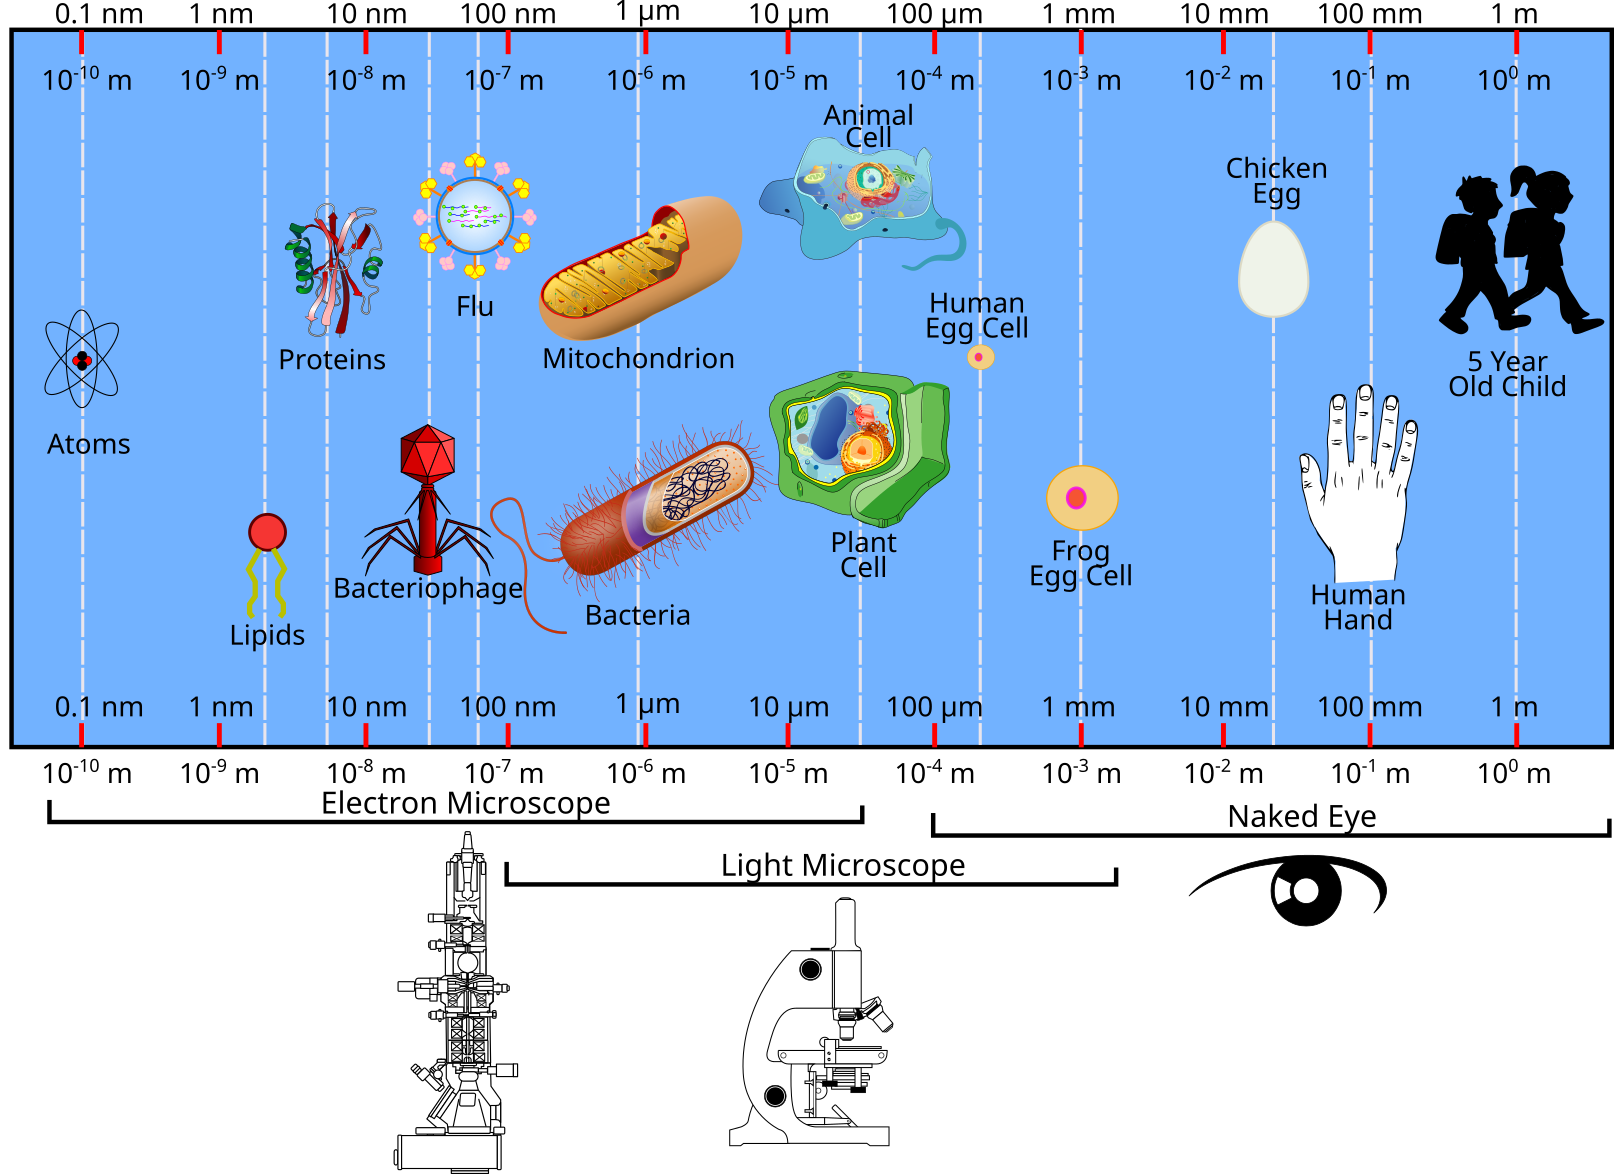 Graphic demonstrating what can be seen with the naked eye (child, hand, chicken egg frog egg); and what can be seen with a light microscope (plant and animal cell, bacteria, mitochondrion); and what can be seen with an electron microscope (flu, protein, bacteriophage, lipids, and atoms)